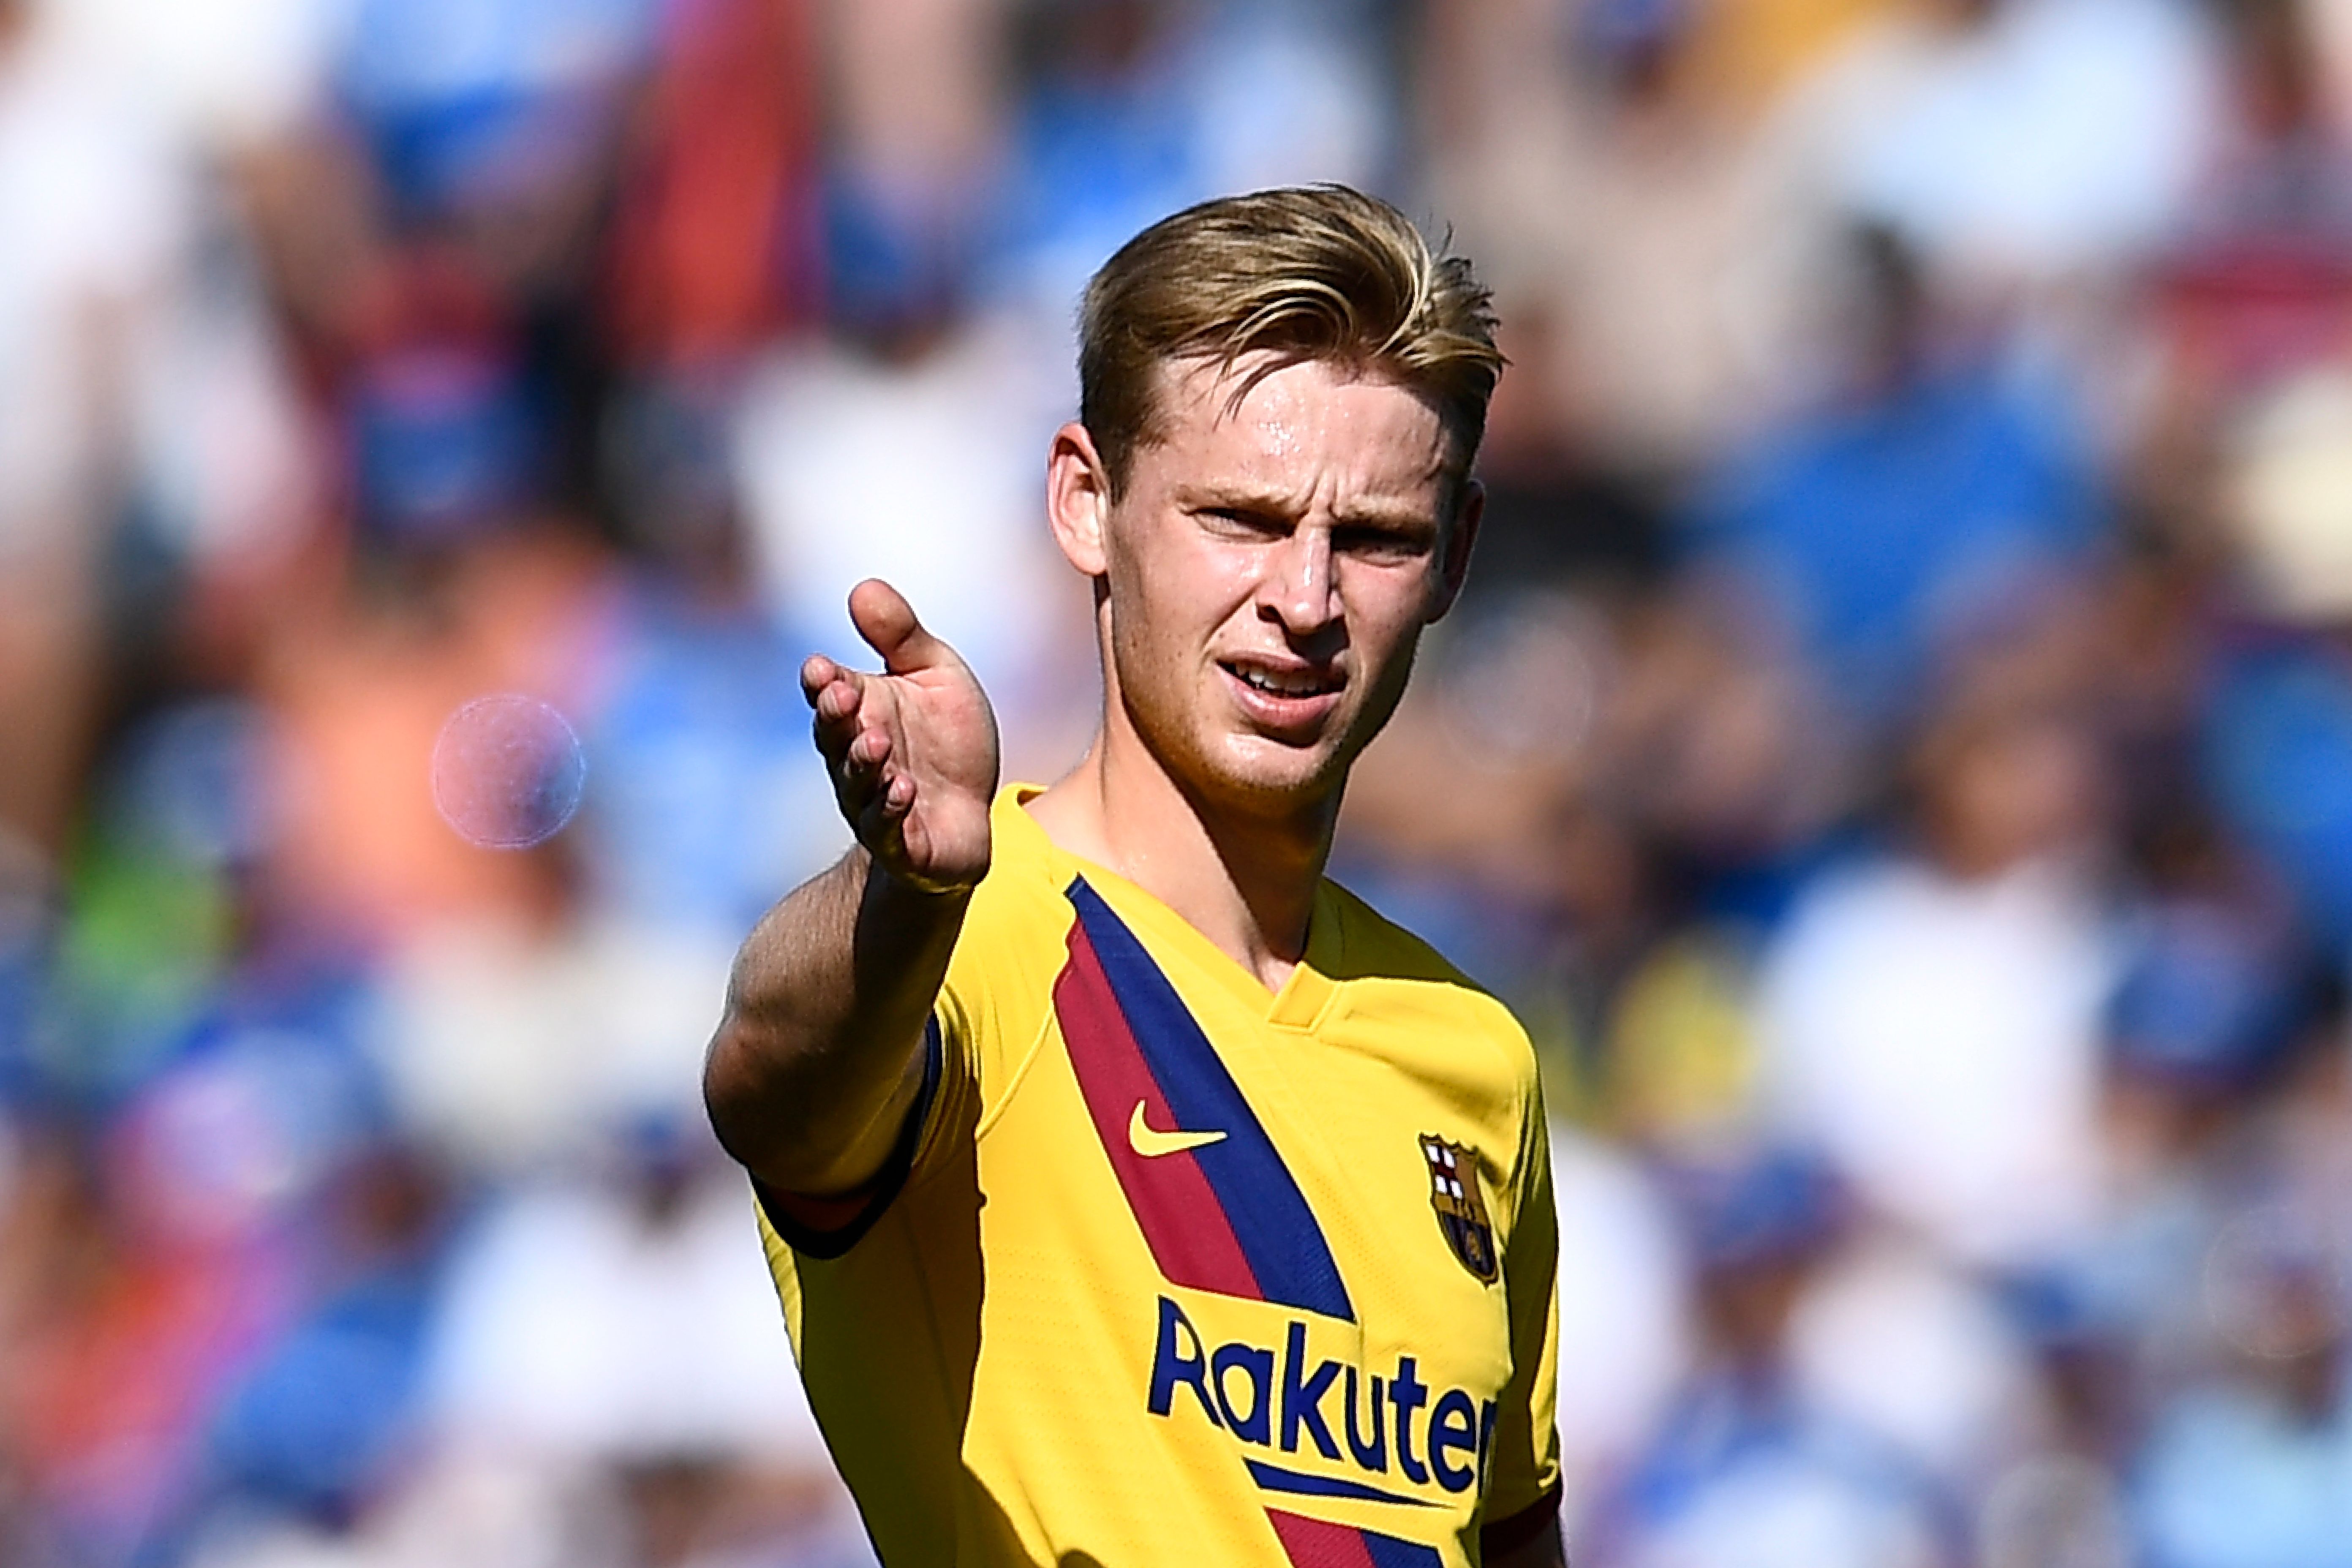 De Jong looks set to leave Barcelona in the upcoming summer transfer window (Photo by Oscar del Pozo/AFP/Getty Images)